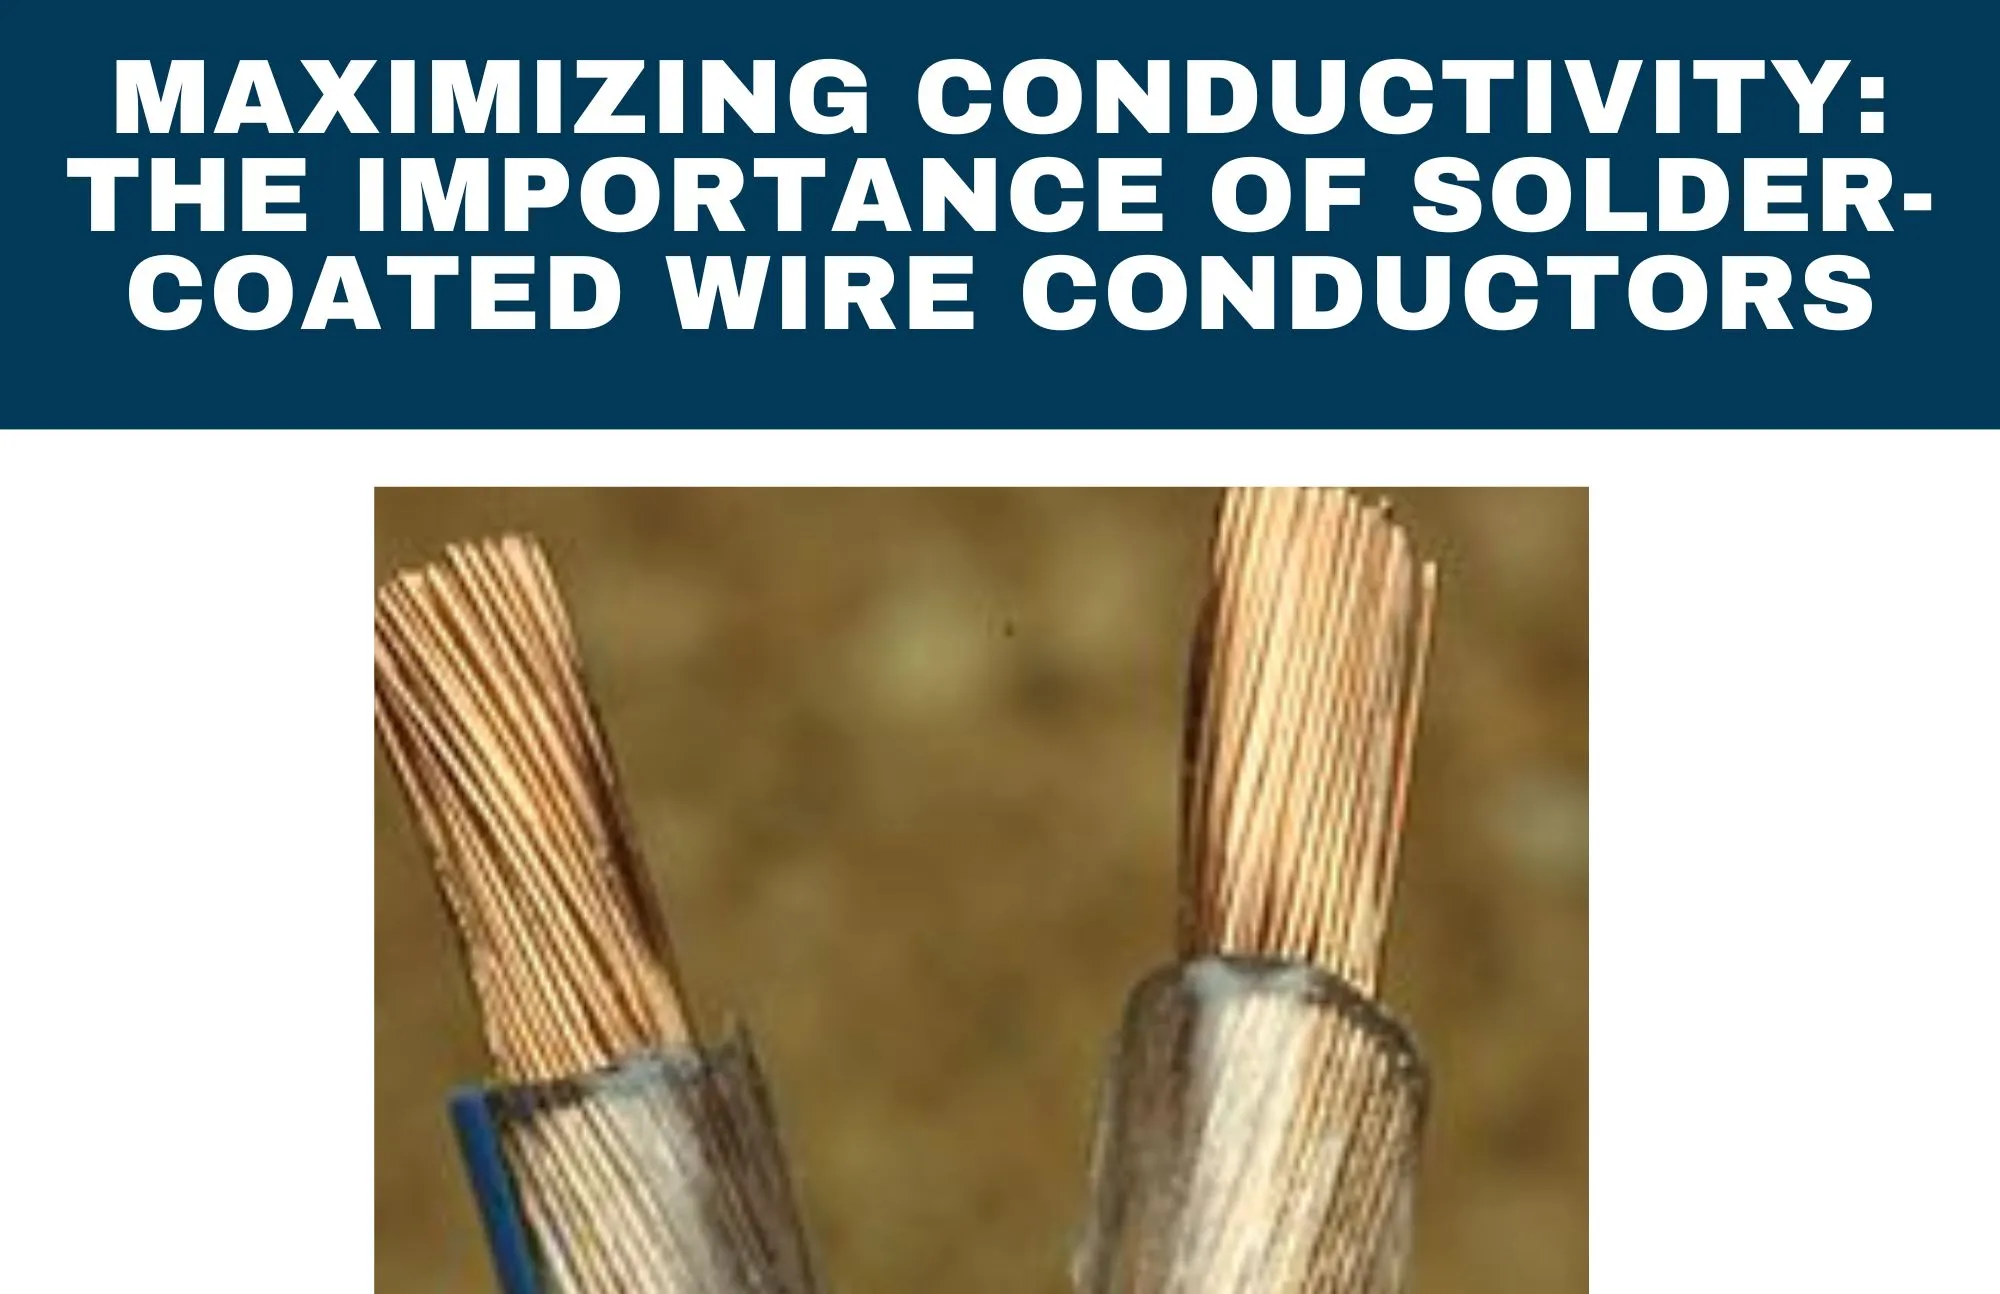 Solder-Coated Wire Conductors